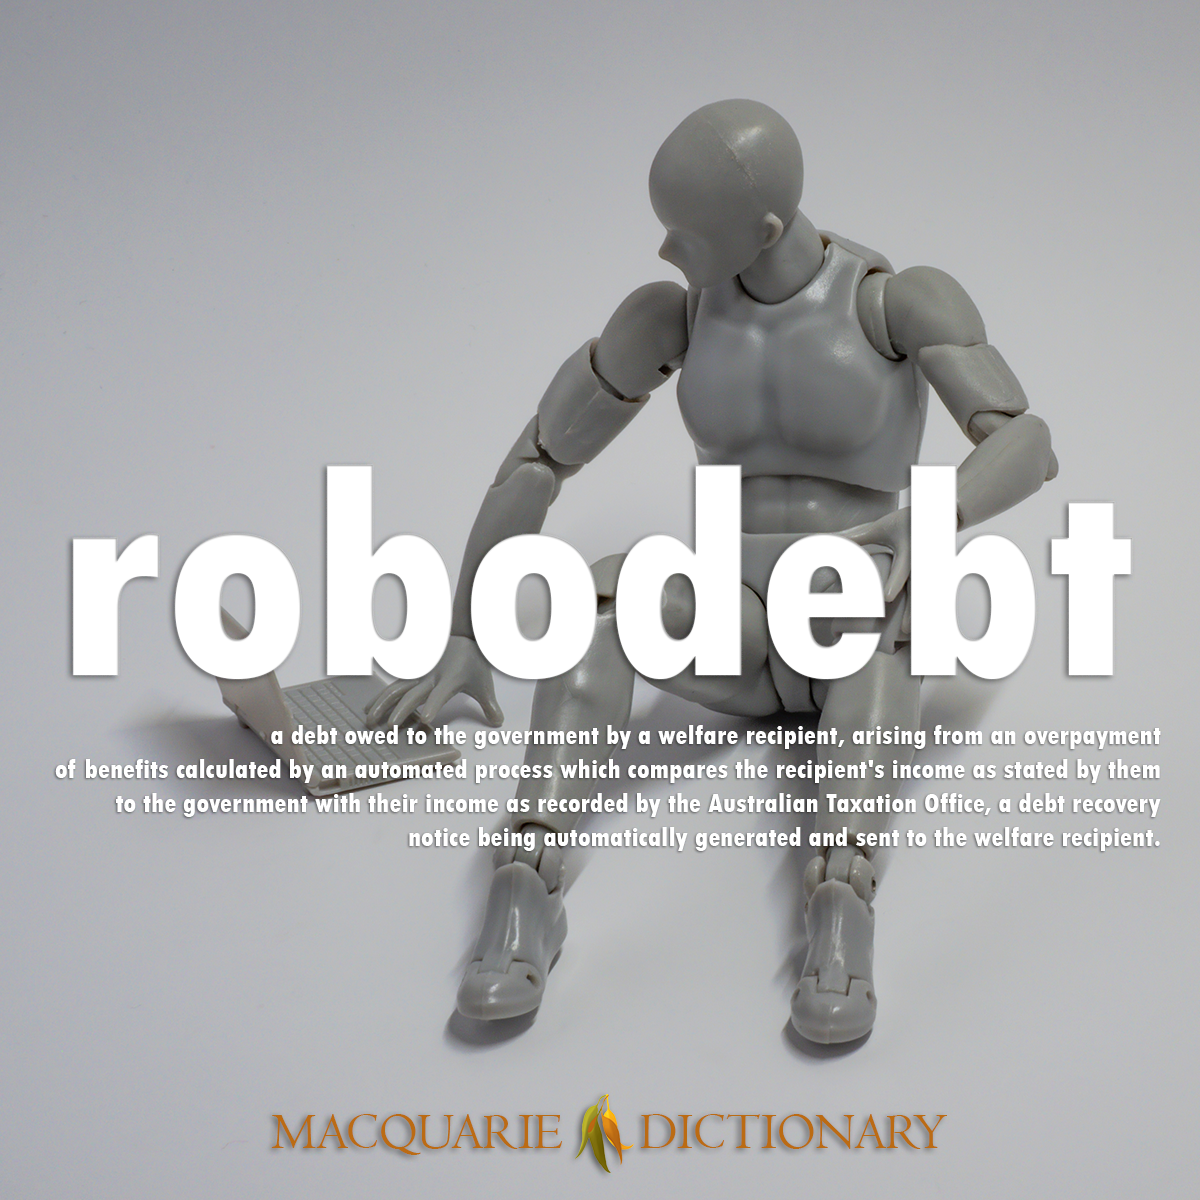 Image of Macquarie Dictionary Word of the Year robodebt a debt owed to the government by a welfare recipient, arising from an overpayment of benefits calculated by an automated process which compares the recipient's income as stated by them to the government with their income as recorded by the Australian Taxation Office, a debt recovery notice being automatically generated and sent to the welfare recipient.